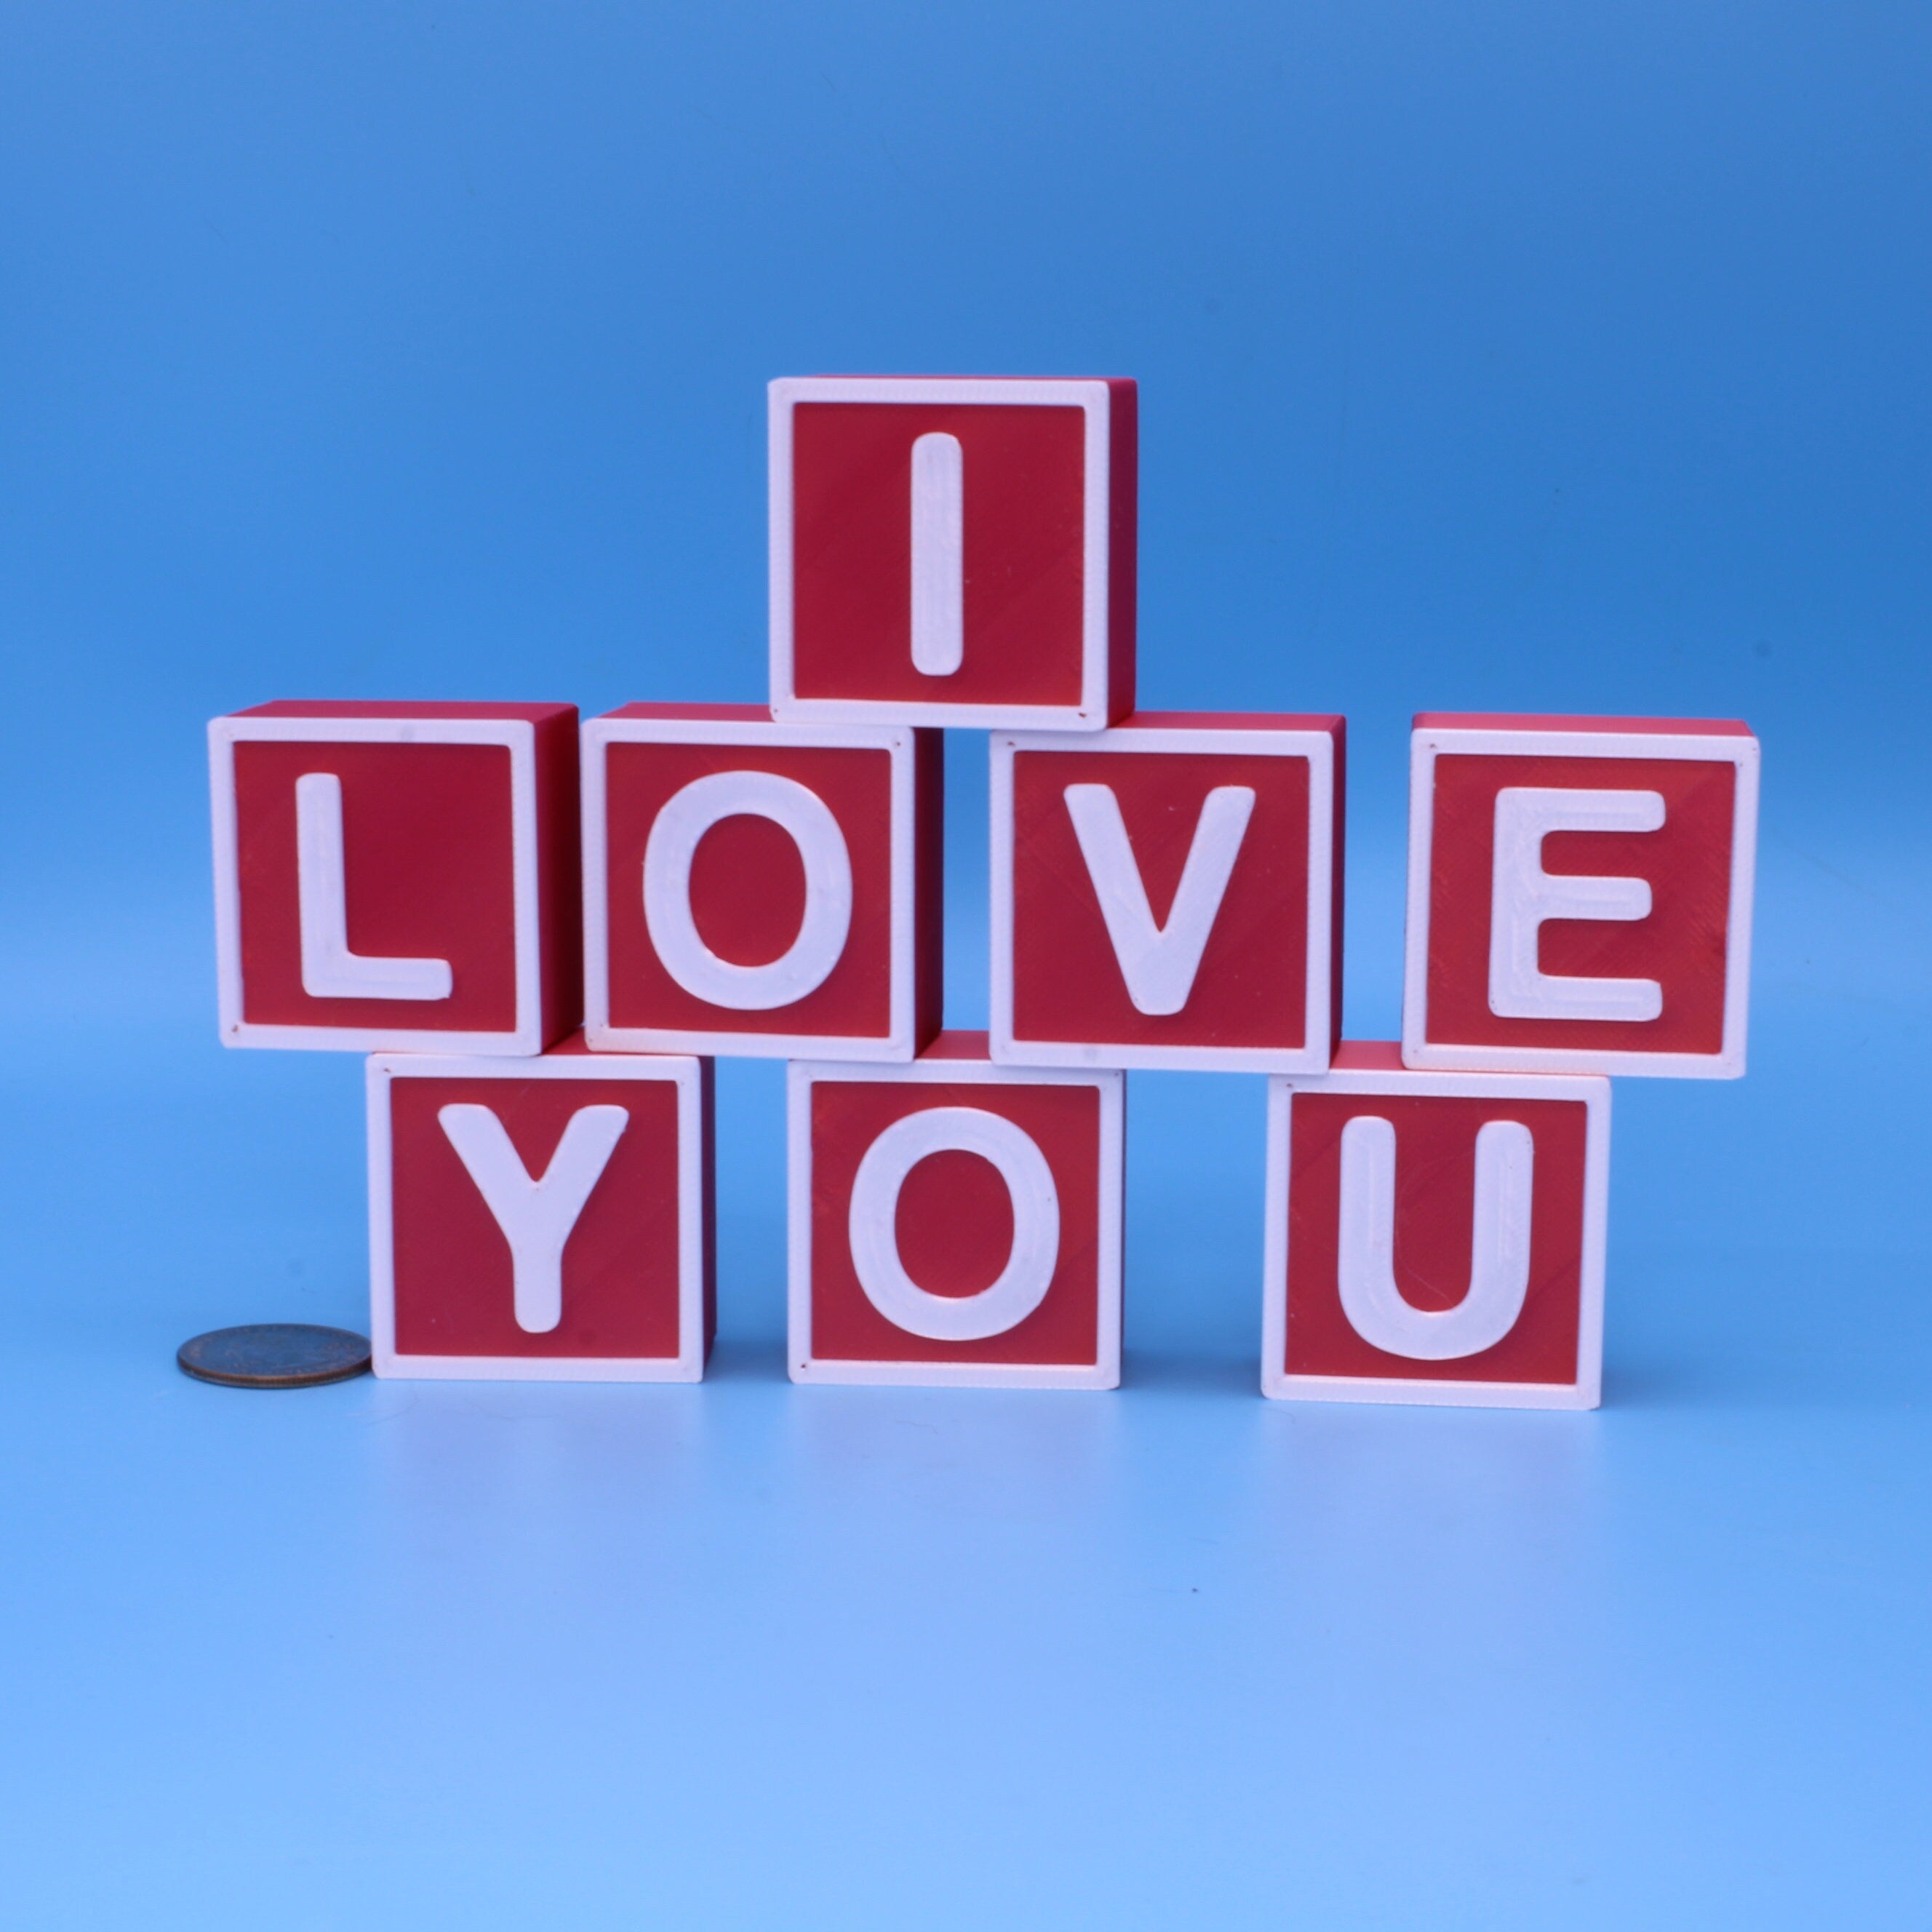 Blocks Valentines Day Themed - 3D Printed